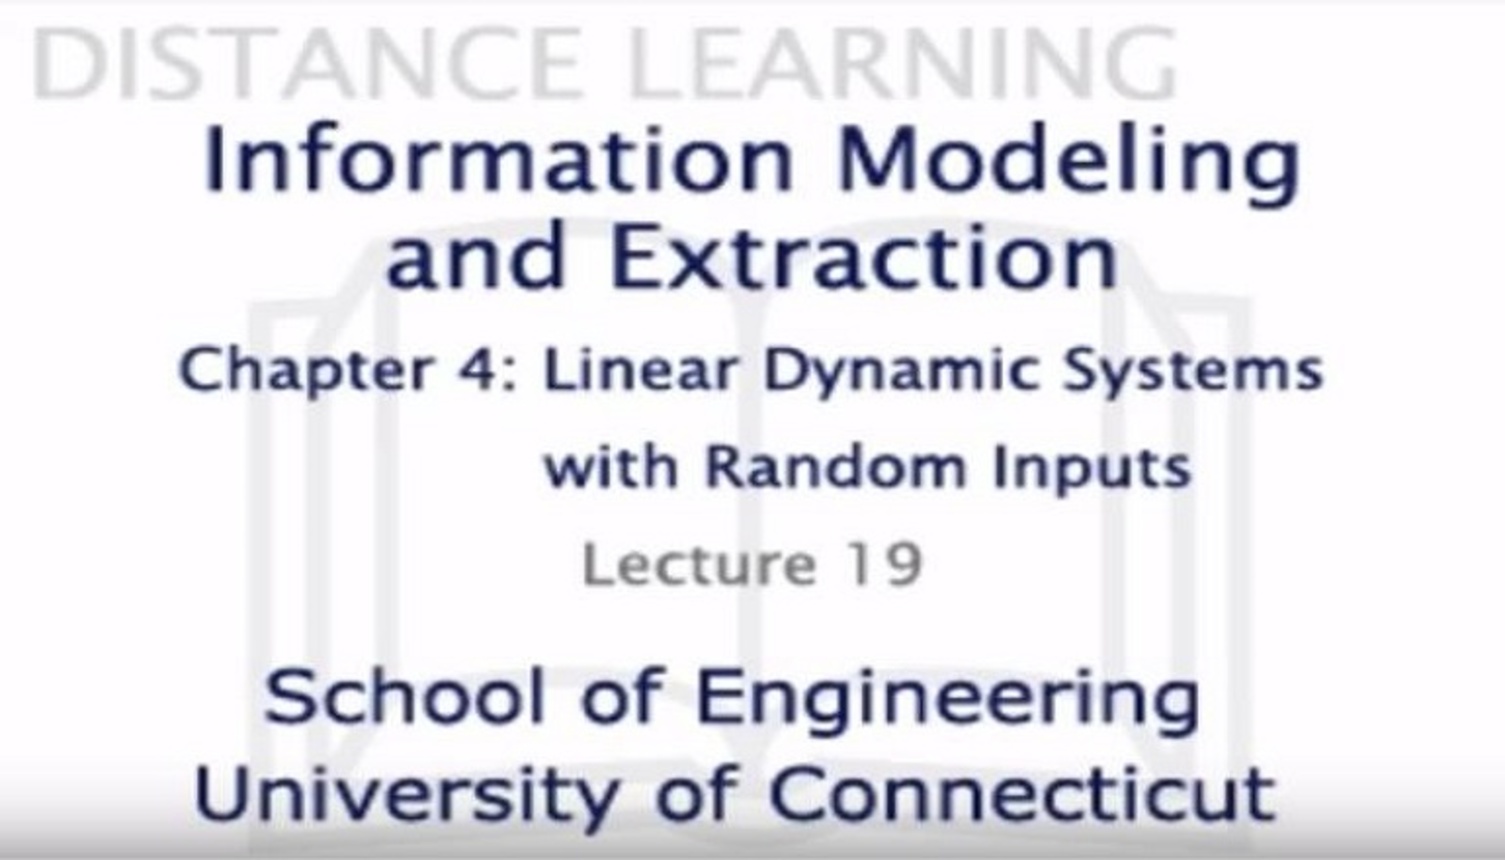 Information Modeling and Extraction Chapter 4 Lecture 19